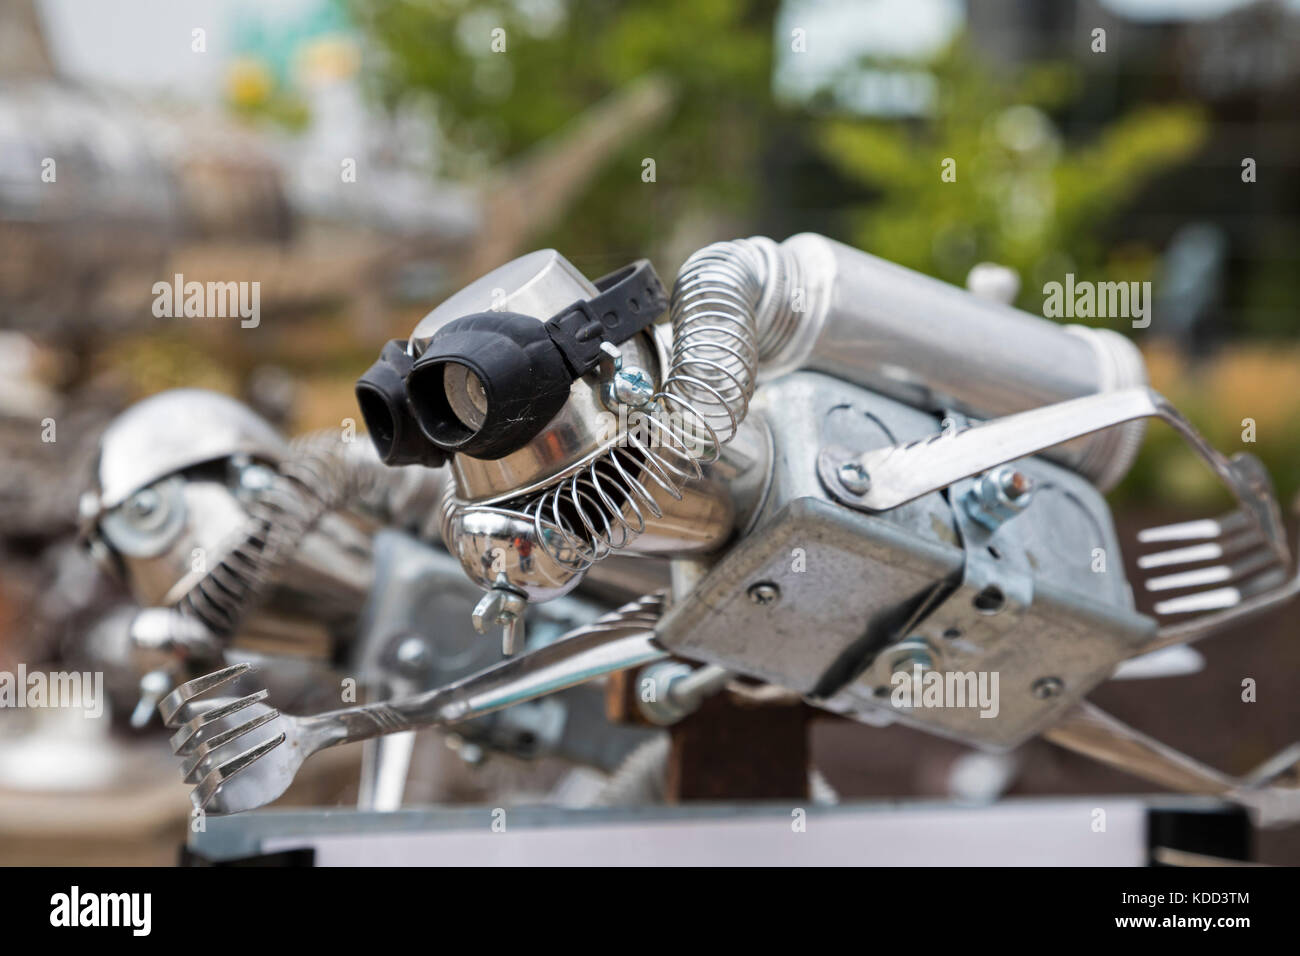 Grand Rapids, Michigan - The annual ArtPrize competition features more than a thousand works of art at nearly 200 venues across the city. A detail of  Stock Photo